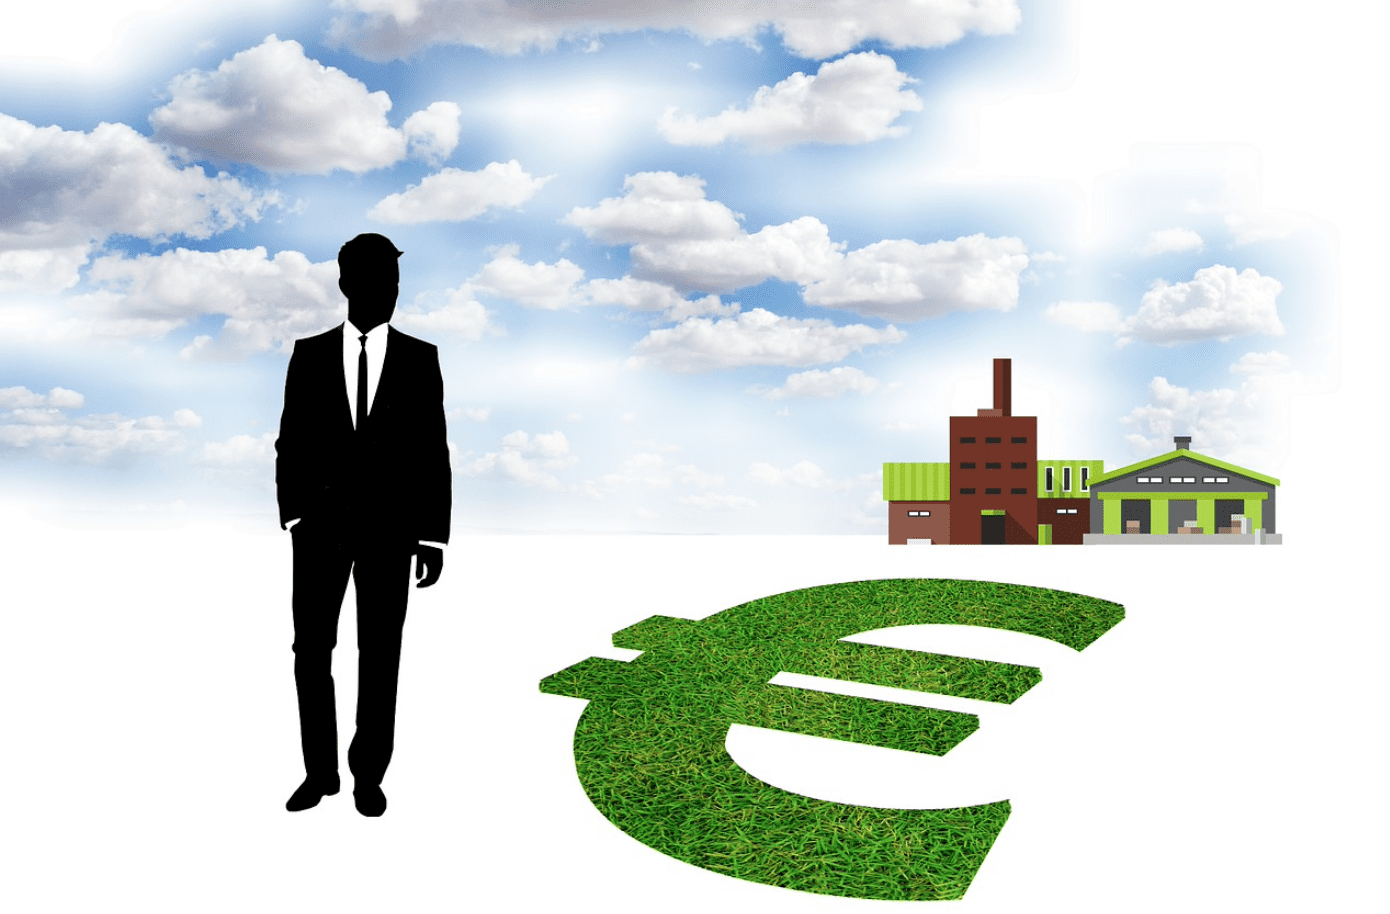 Graphic of man in suit against blue sky with white clouds. Factory in background; money sign with green grass fill in foreground. Image by Tumisu, via Pixabay.com.